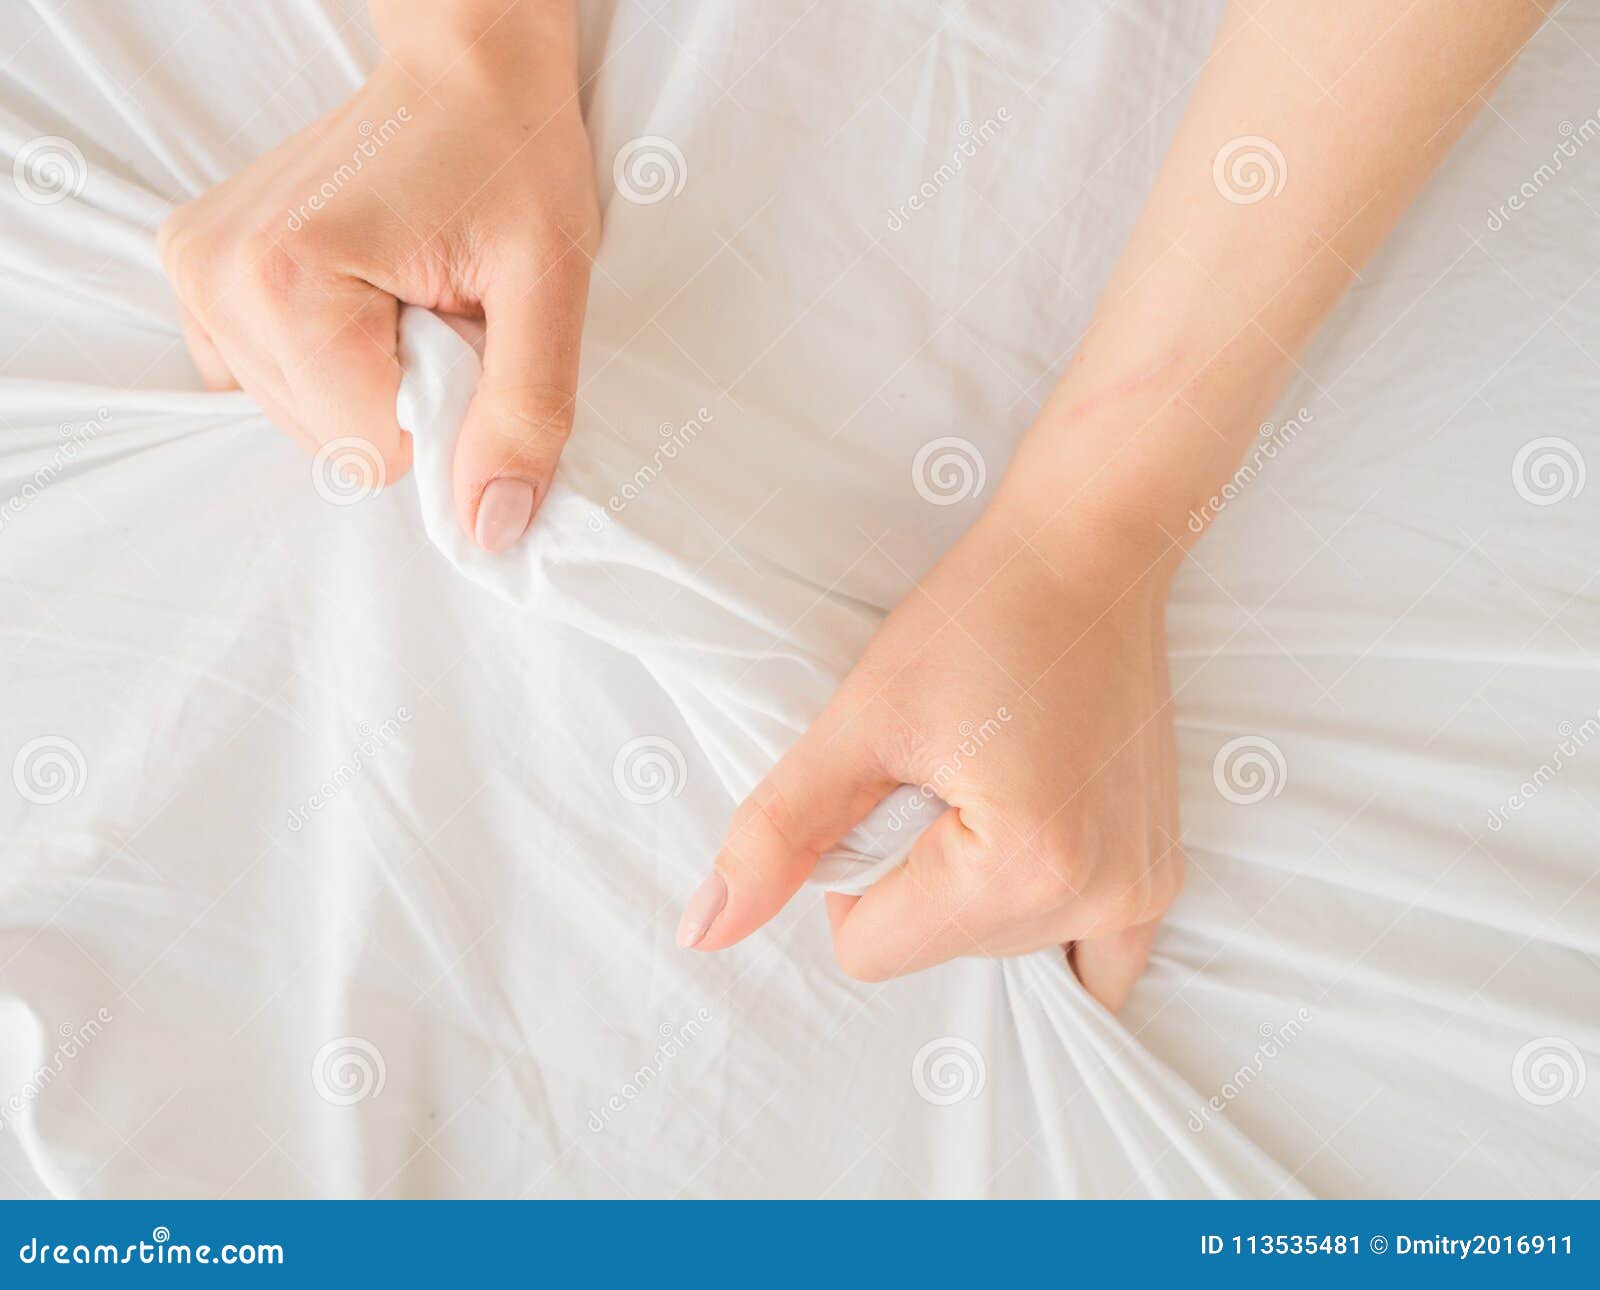 Hand Of Women Pulling White Sheets In Lust And Orgasm Stock Image Image Of Female Health